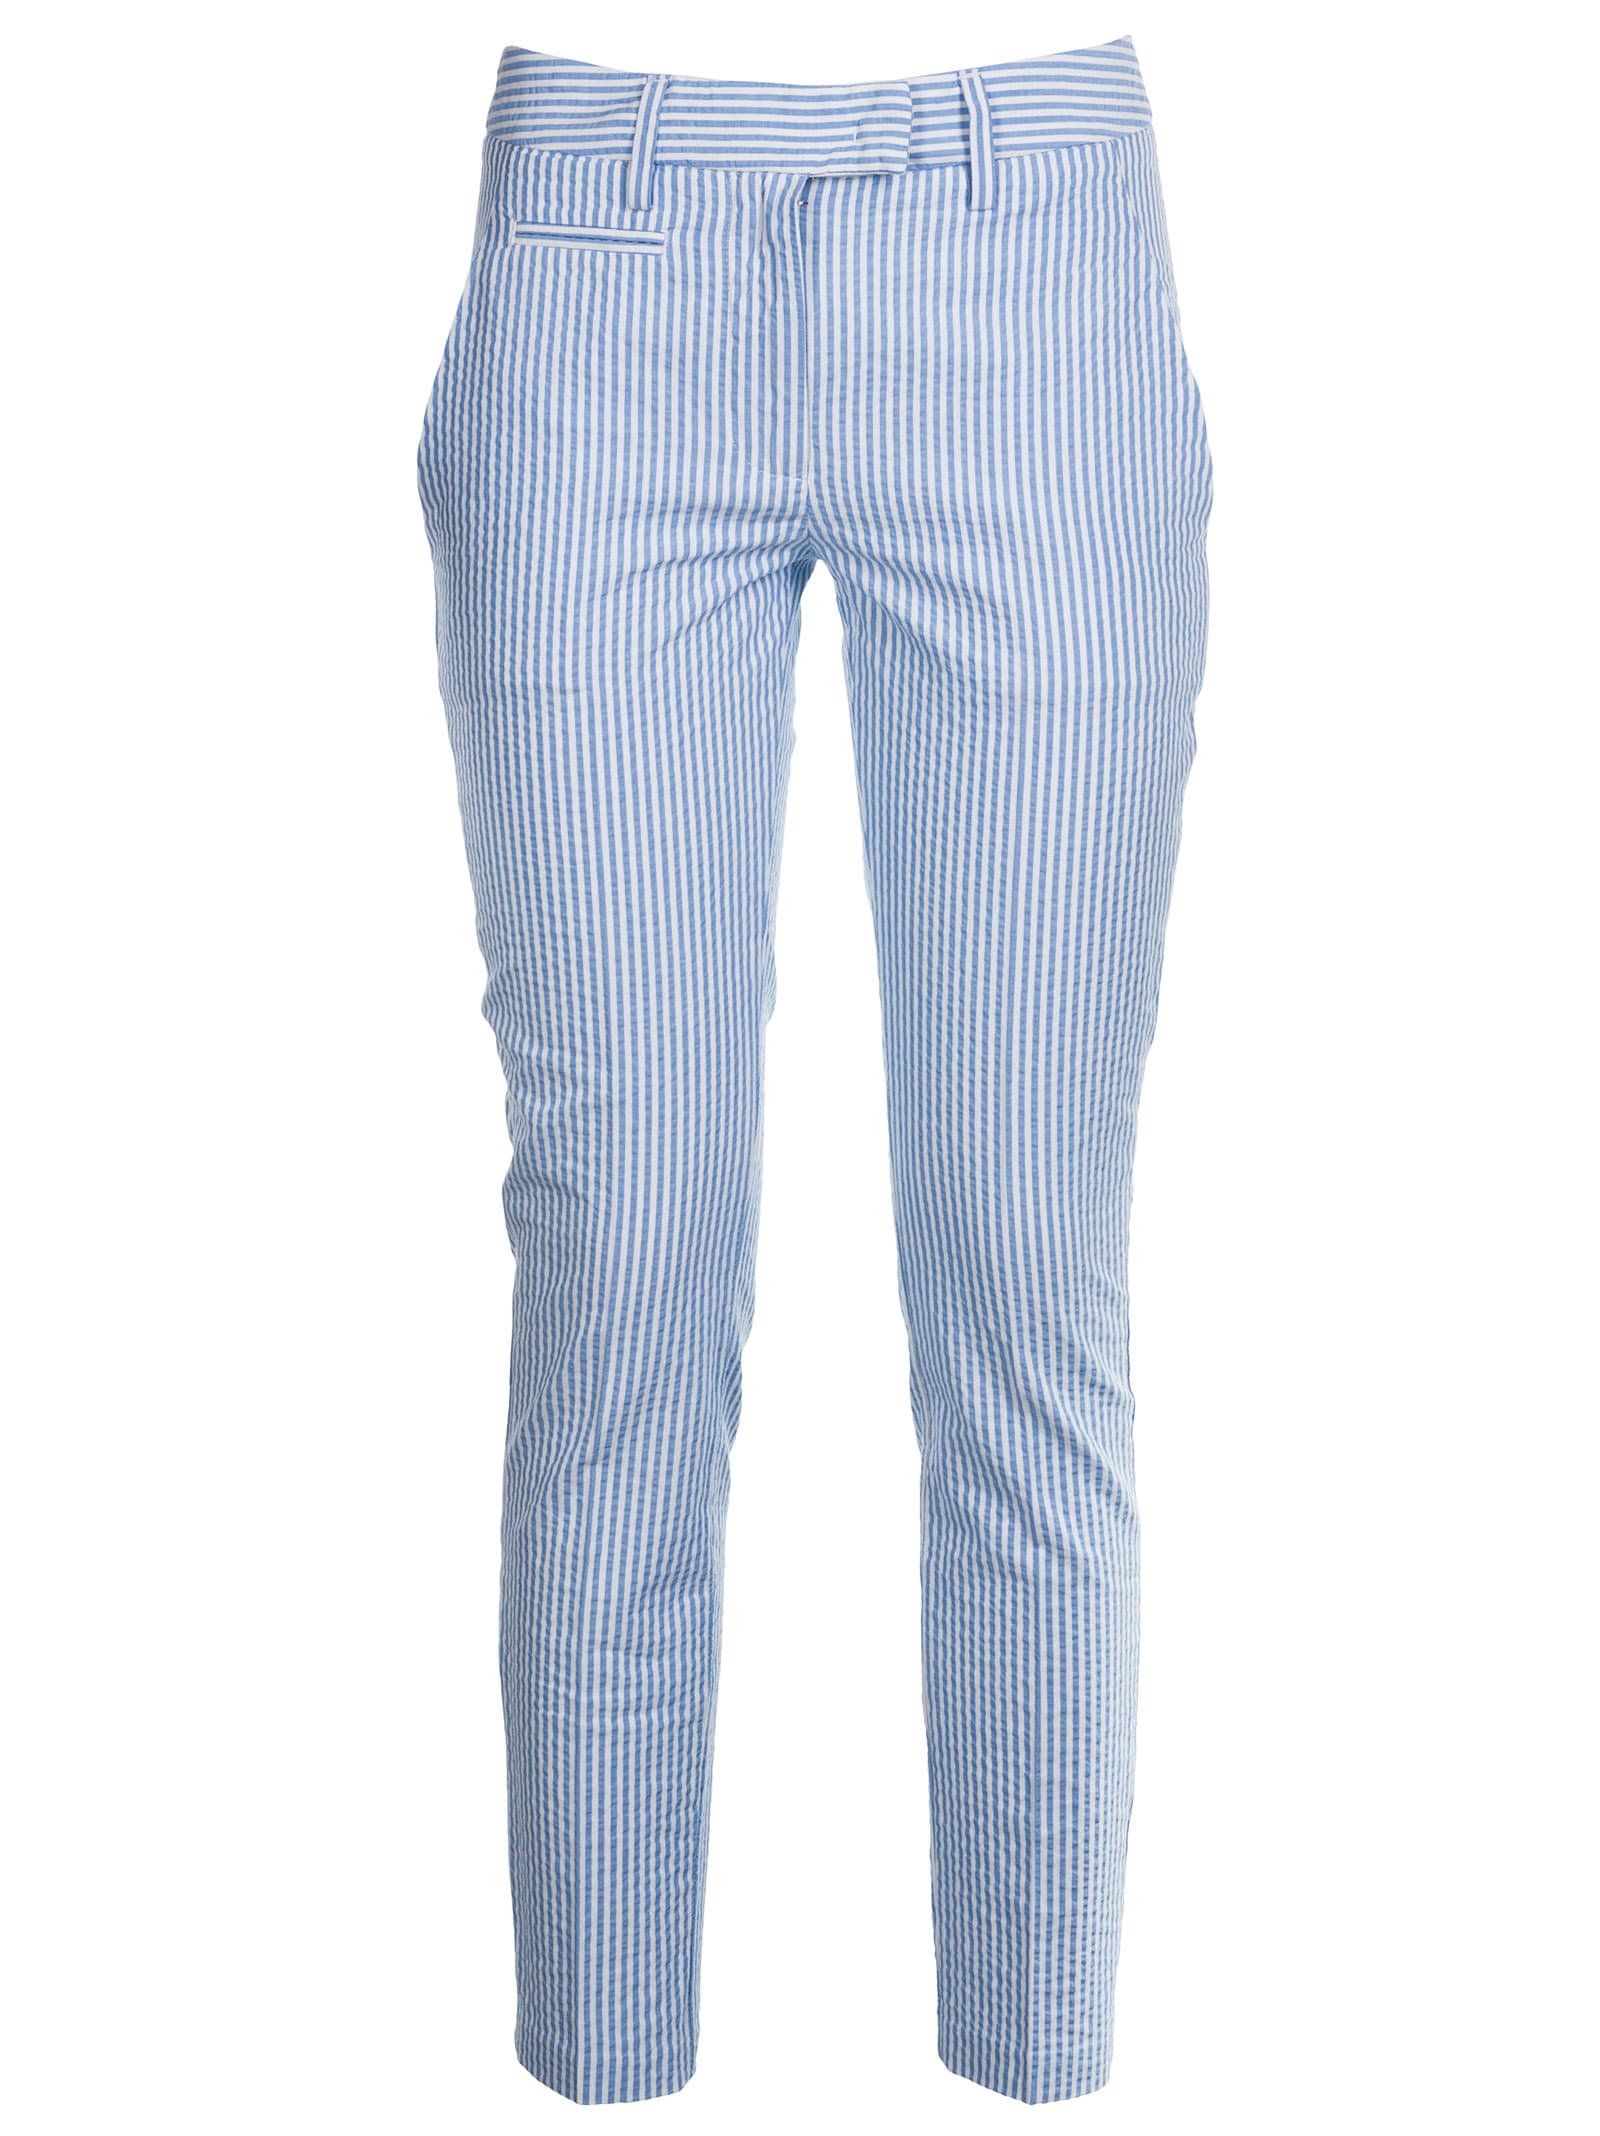 DONDUP STRIPED SLIM TROUSERS,11308418